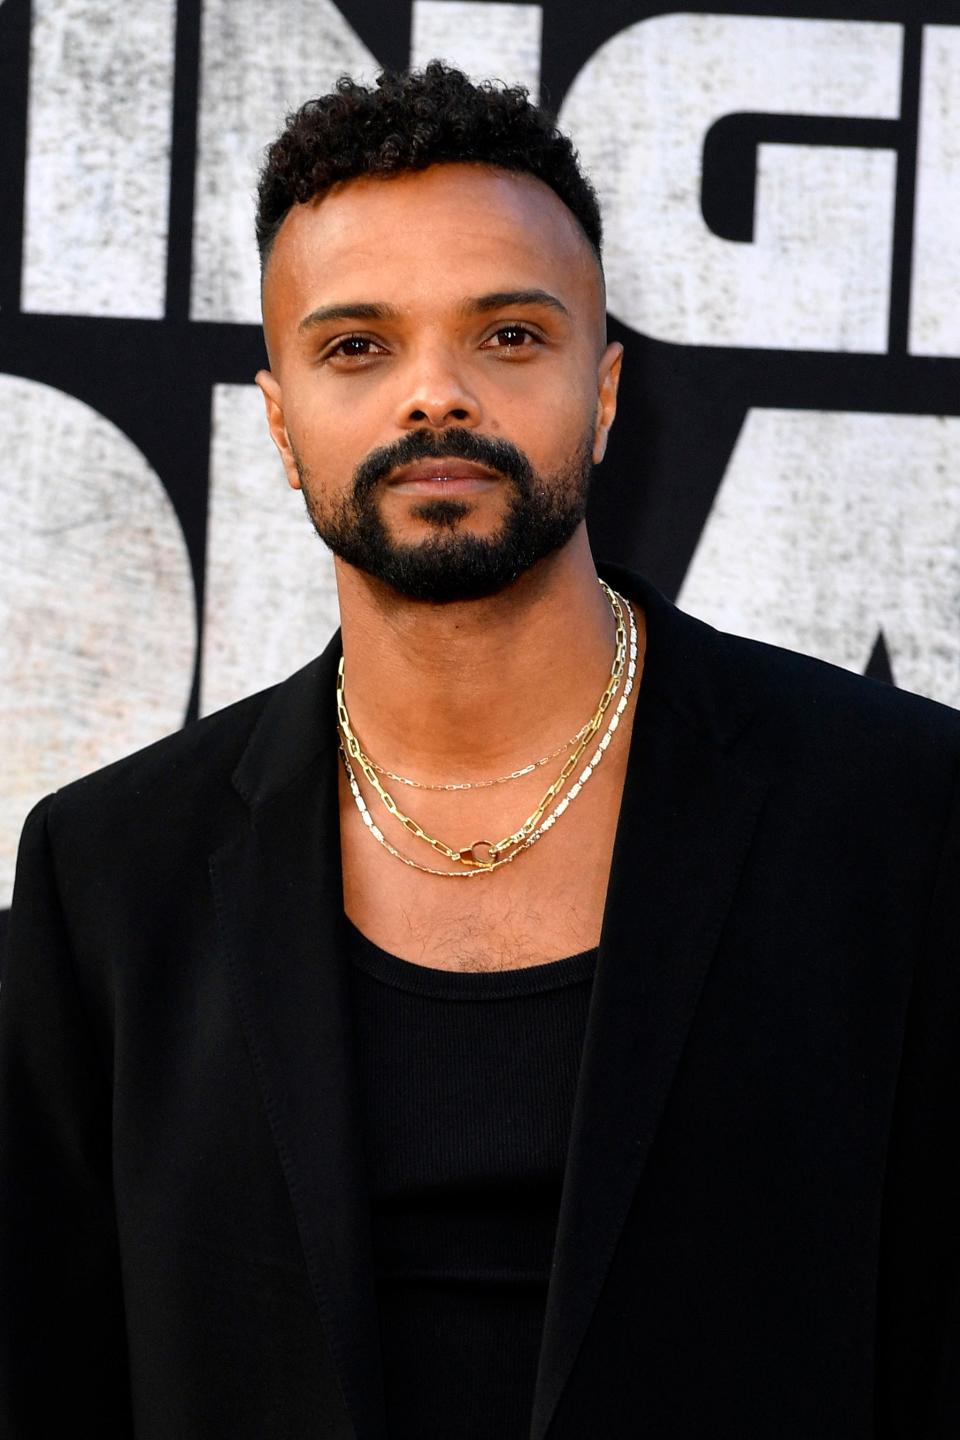 Eka Darville in a black outfit with gold necklaces at the premiere for Kingdom of the Planet of the Apes